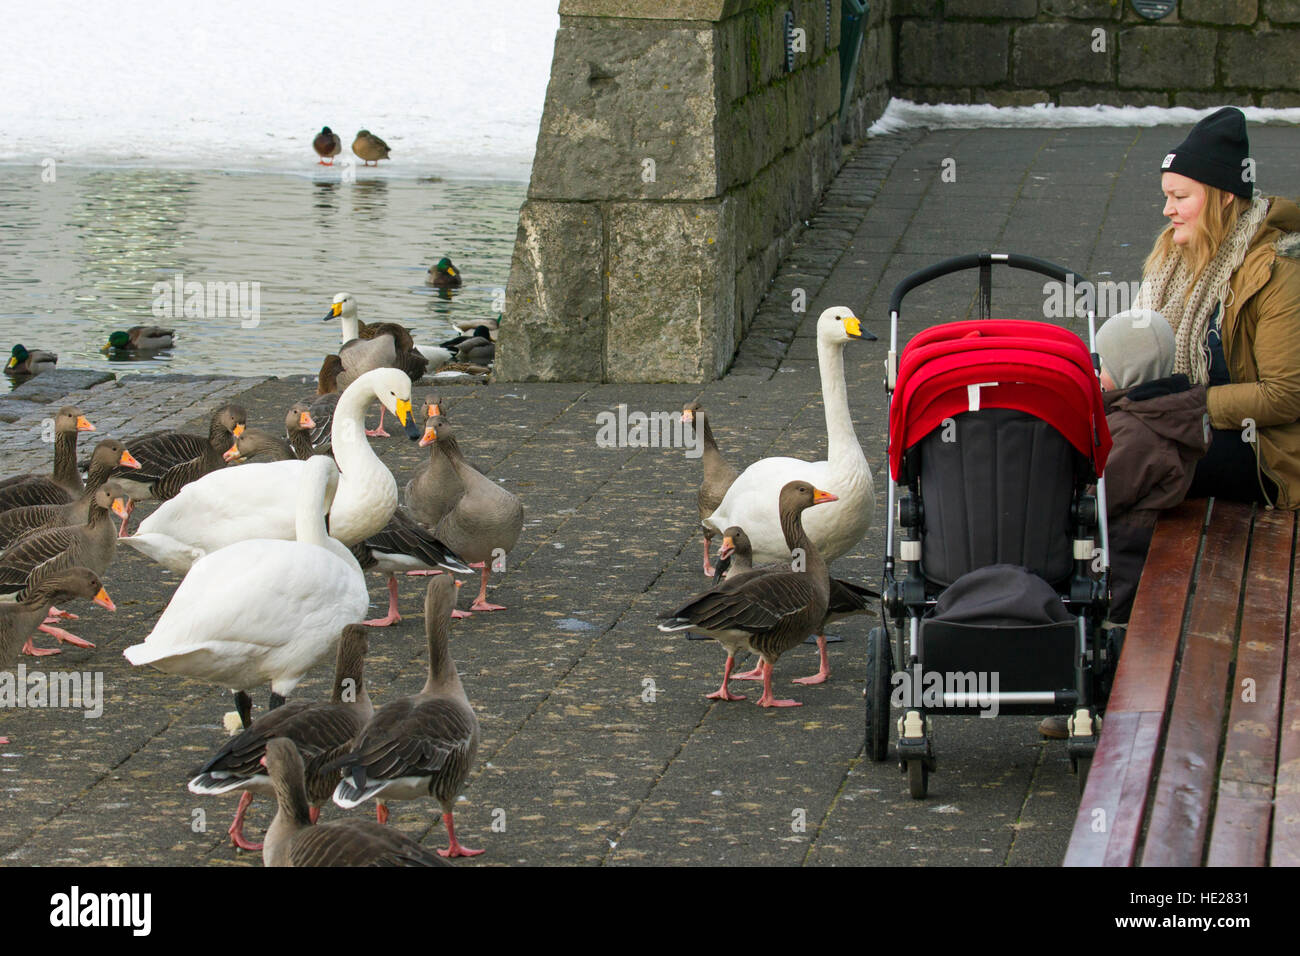 Mother with child feeding ducks, geese and whooper swans at lake in city park in winter Stock Photo